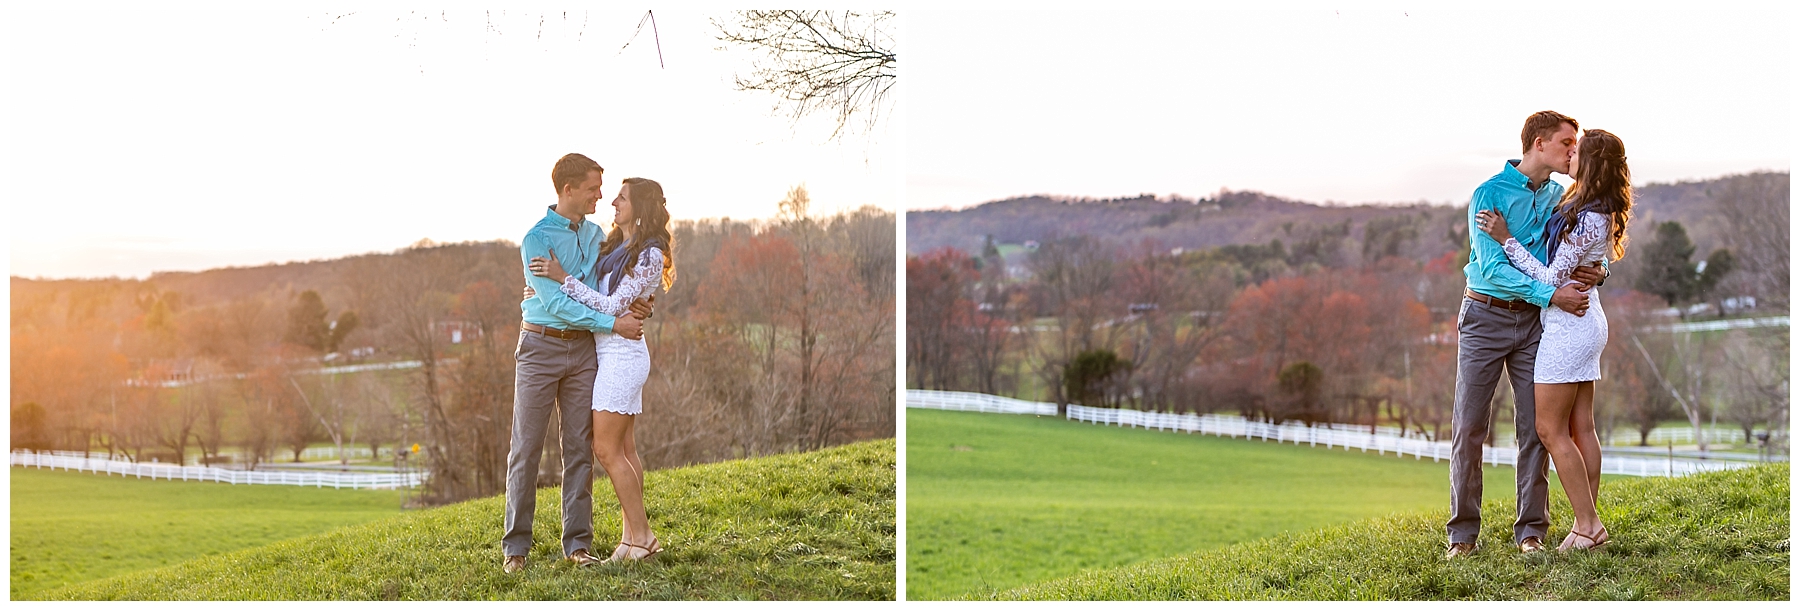 Chelsea Phil Private Estate Engagement Living Radiant Photography photos color_0038.jpg